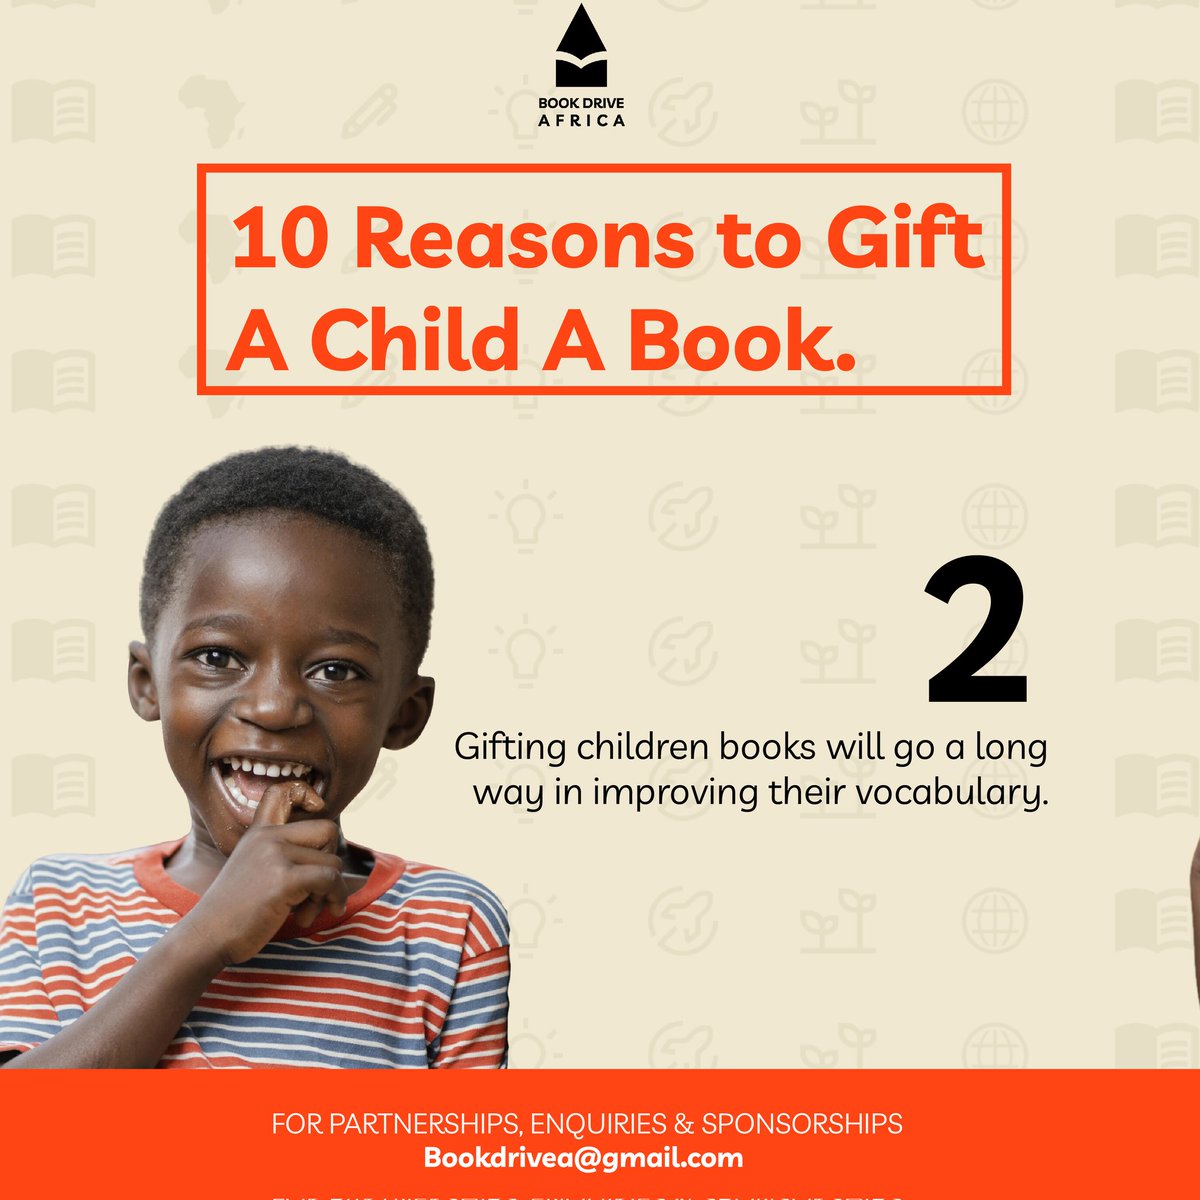 'Equipping a child with the ability to read is like giving them wings to fly through the realms of knowledge'.

Support us today!
#SupportEducation
#EmpowerYoungMinds
#BookDonation
#ChildrensBooks
#OAUTwitter